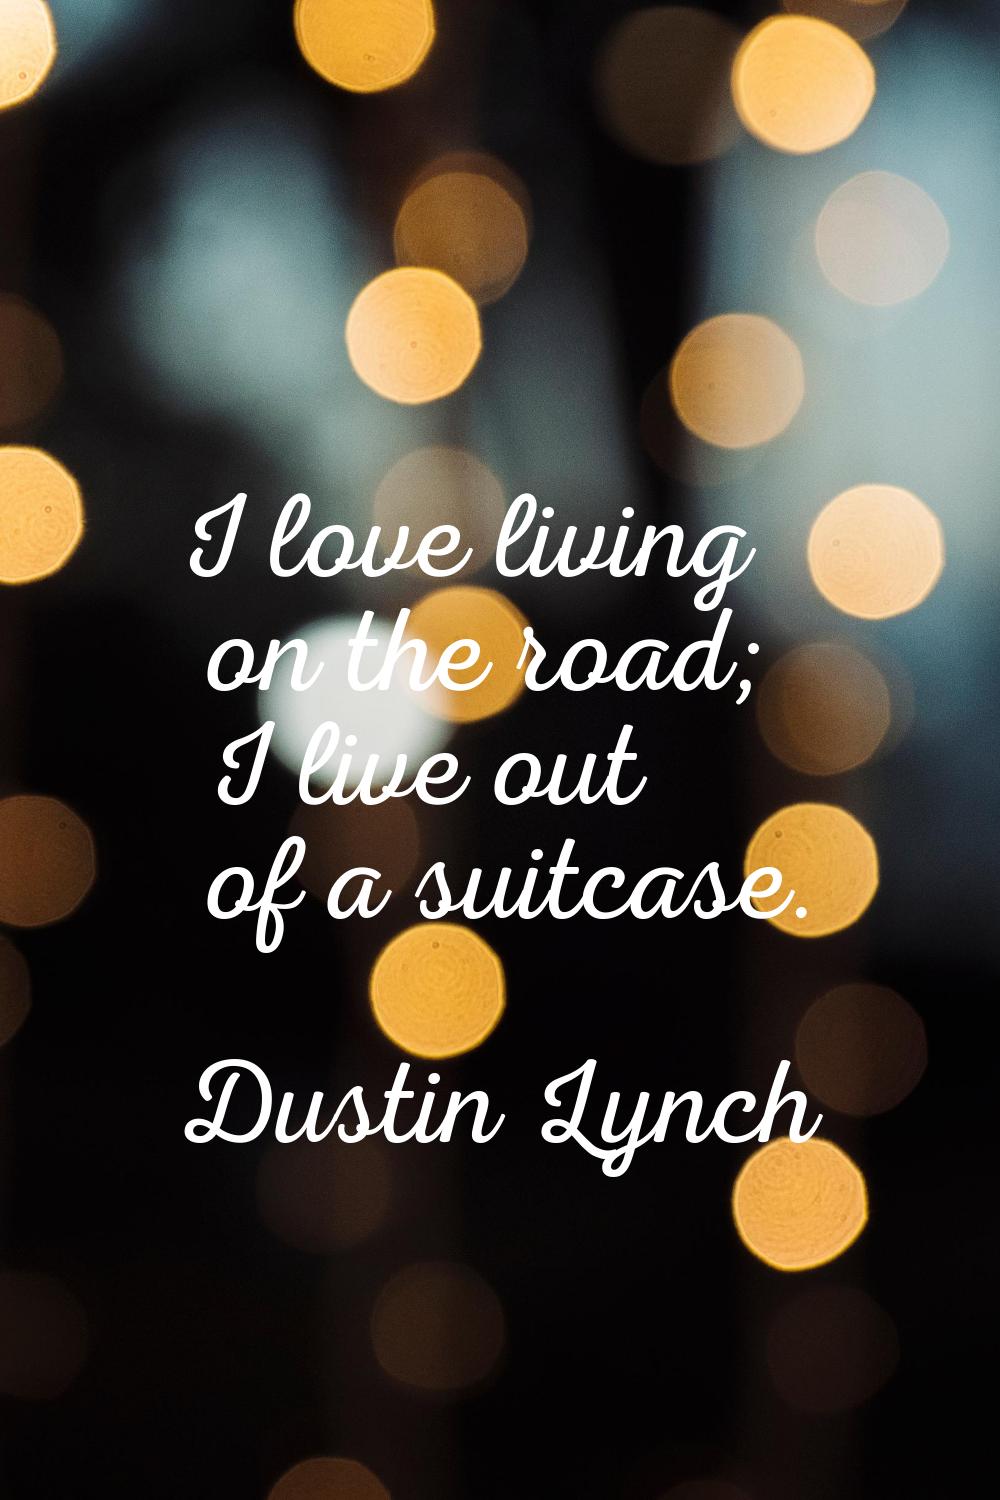 I love living on the road; I live out of a suitcase.